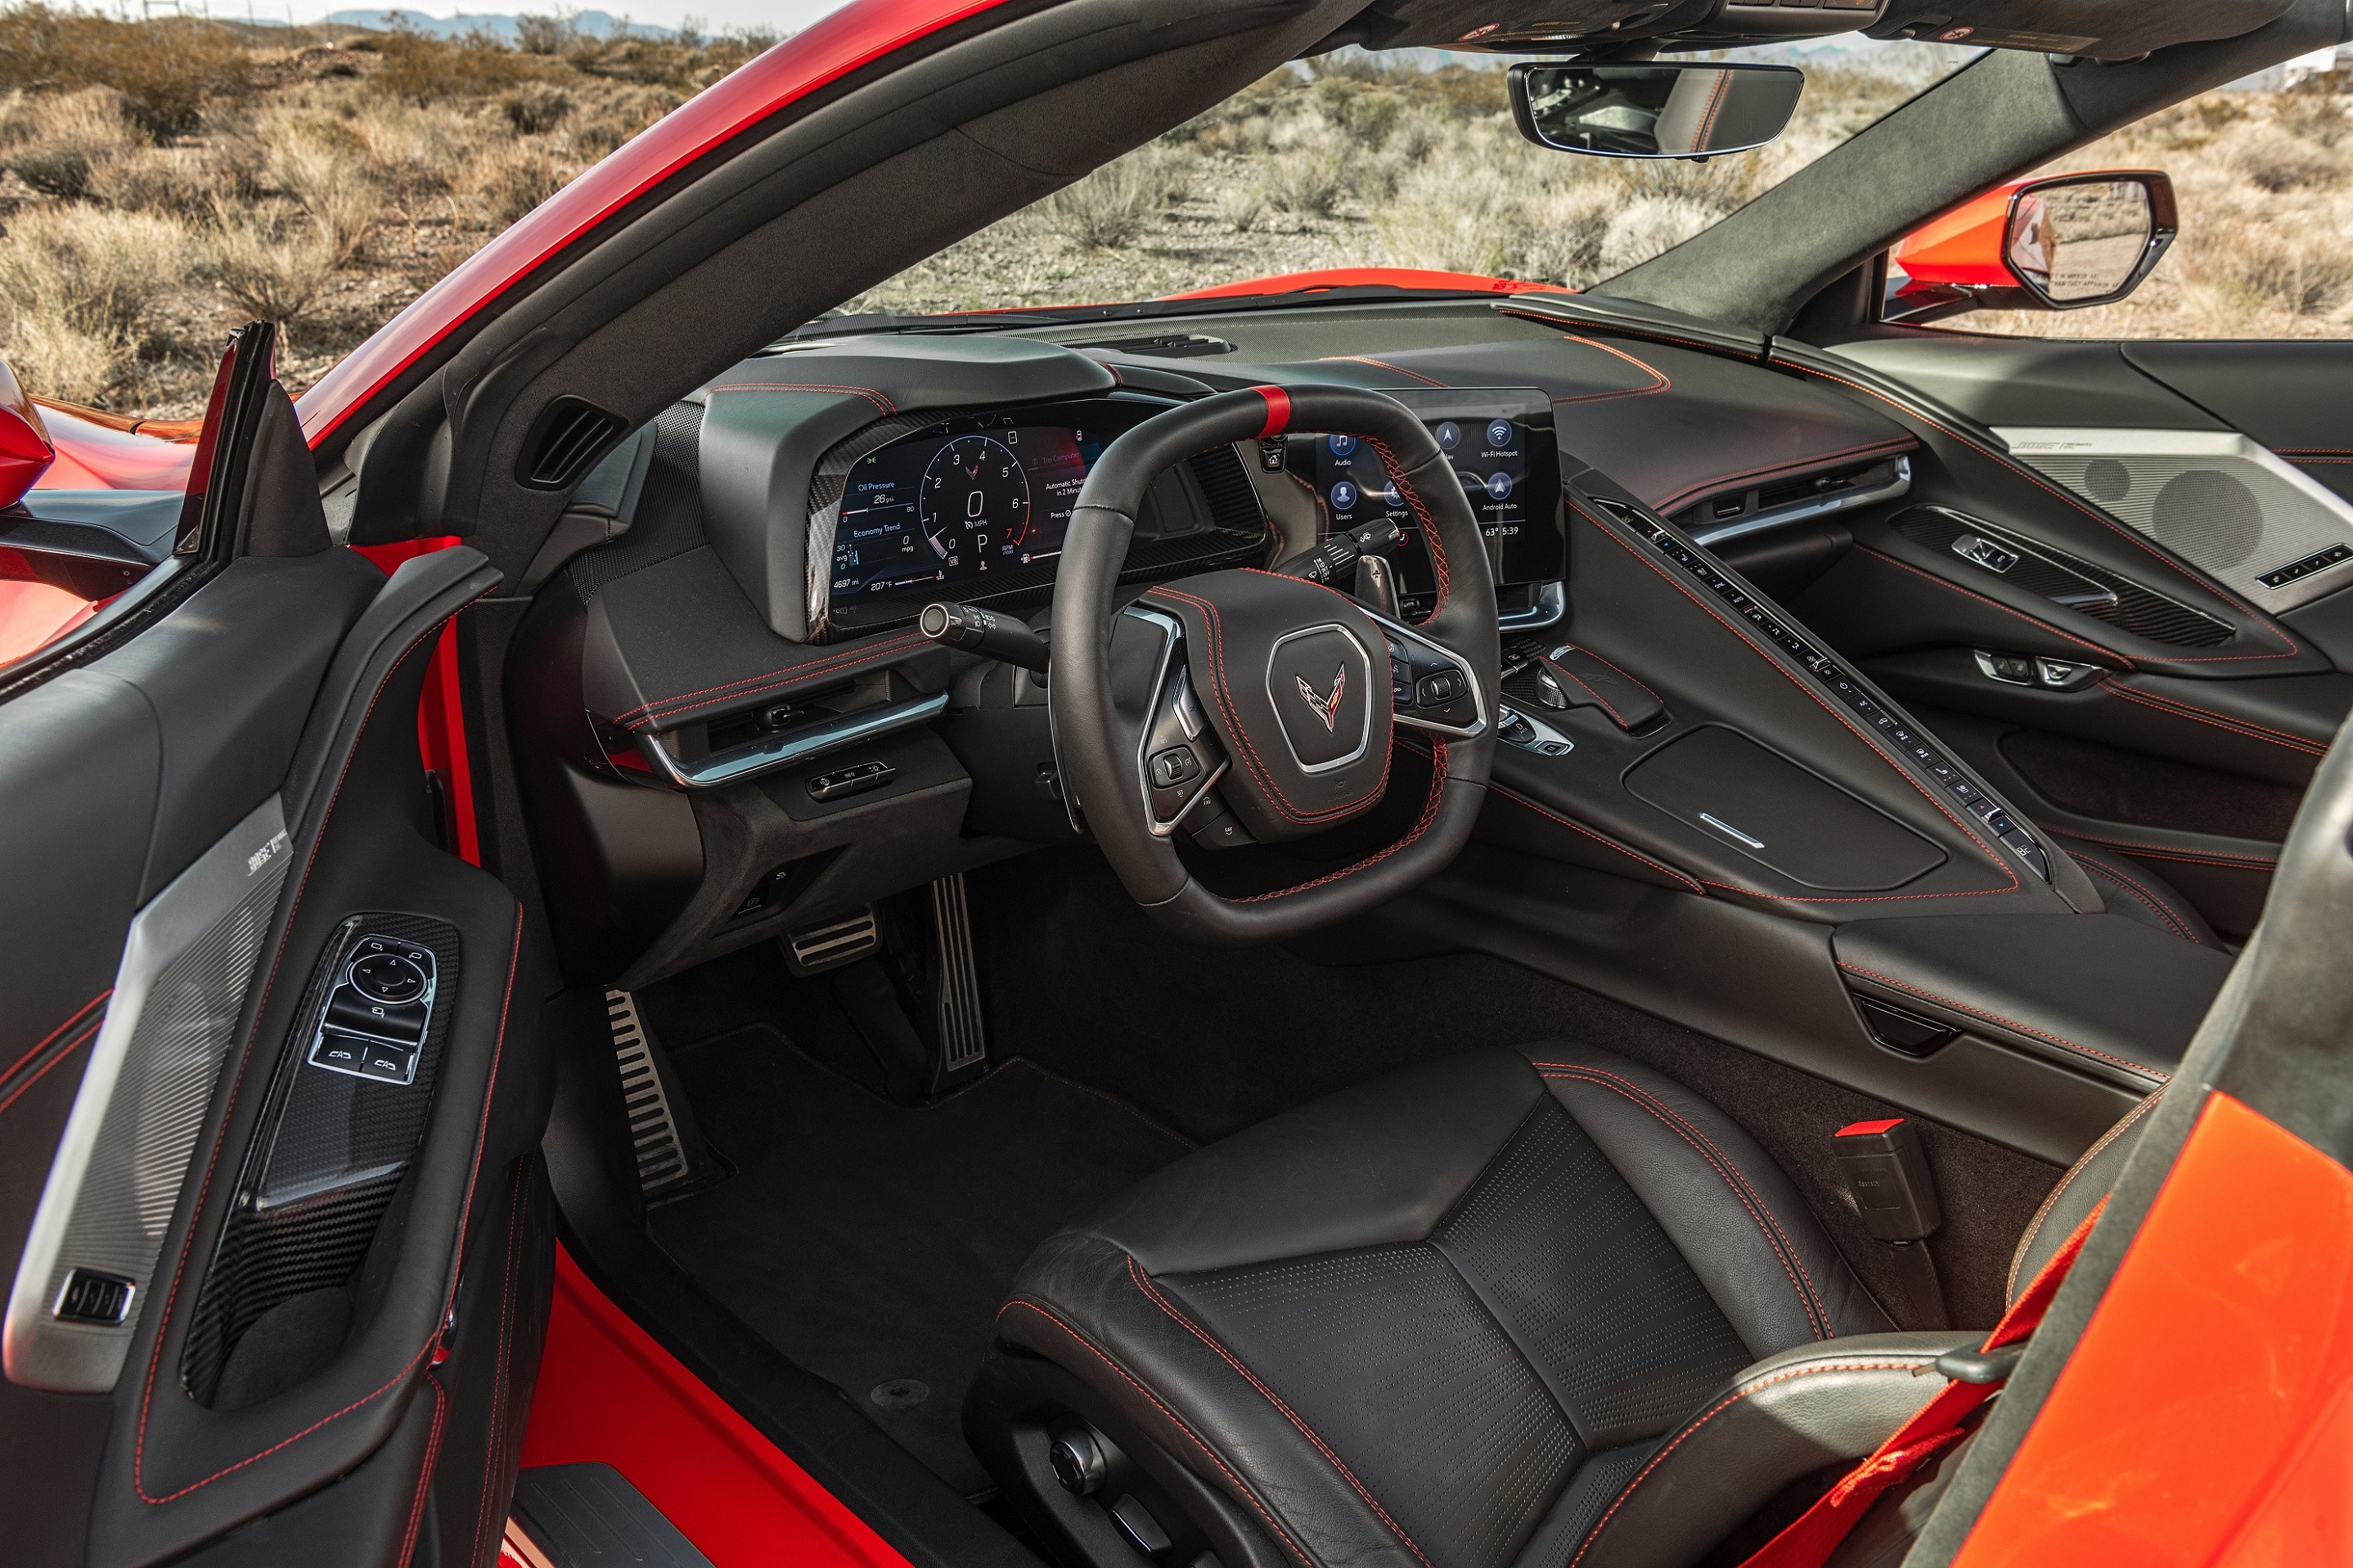 The black seats and convertible of a red 2022 Chevrolet C8 Corvette Stingray Convertible in the desert